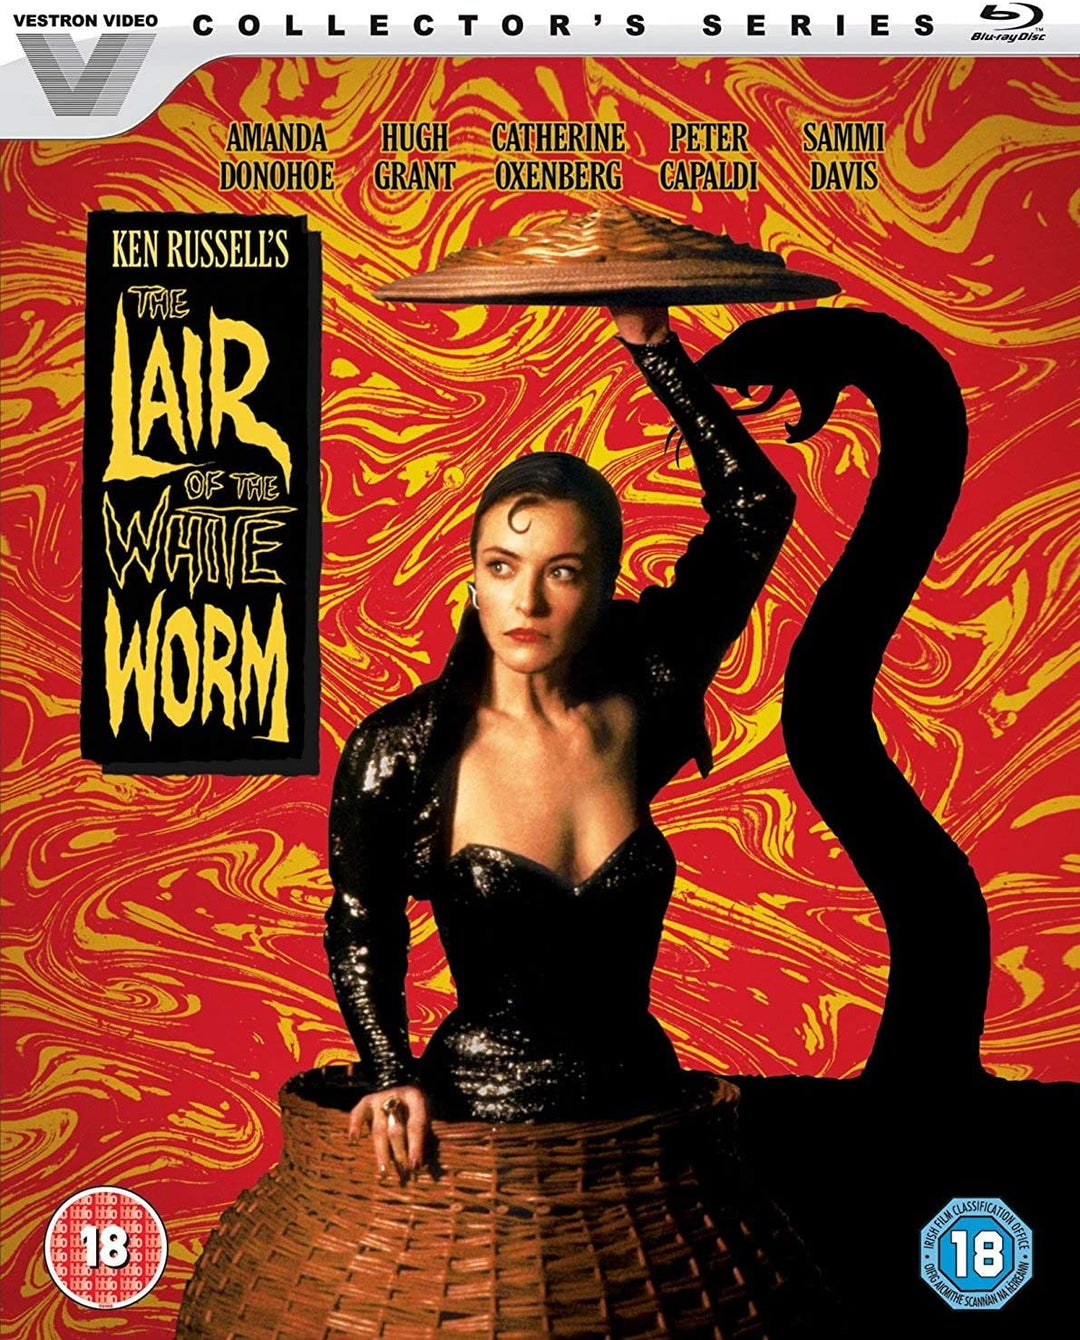 Lair of the White Worm - Horror/Comedy [Blu-ray]